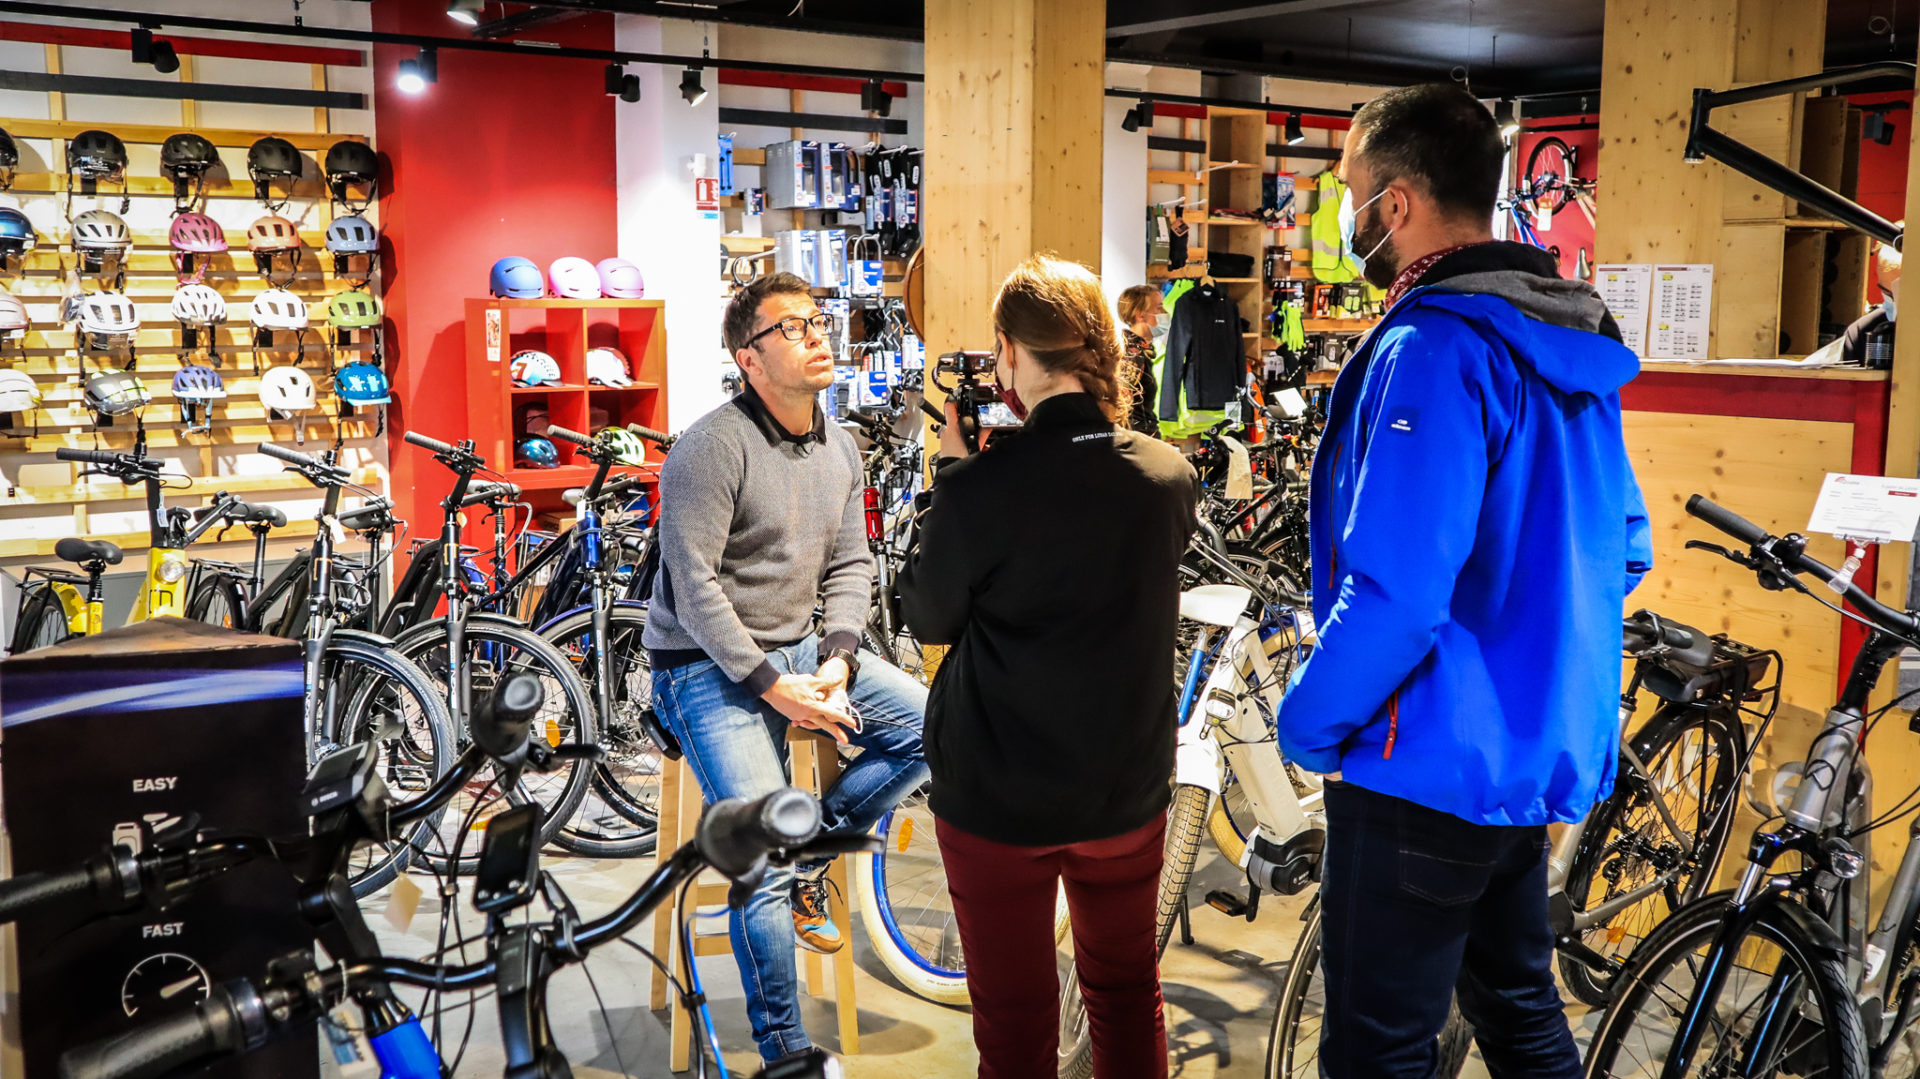 Weelz Visite Rennes Magasin Velo Cyclable 2021 8703